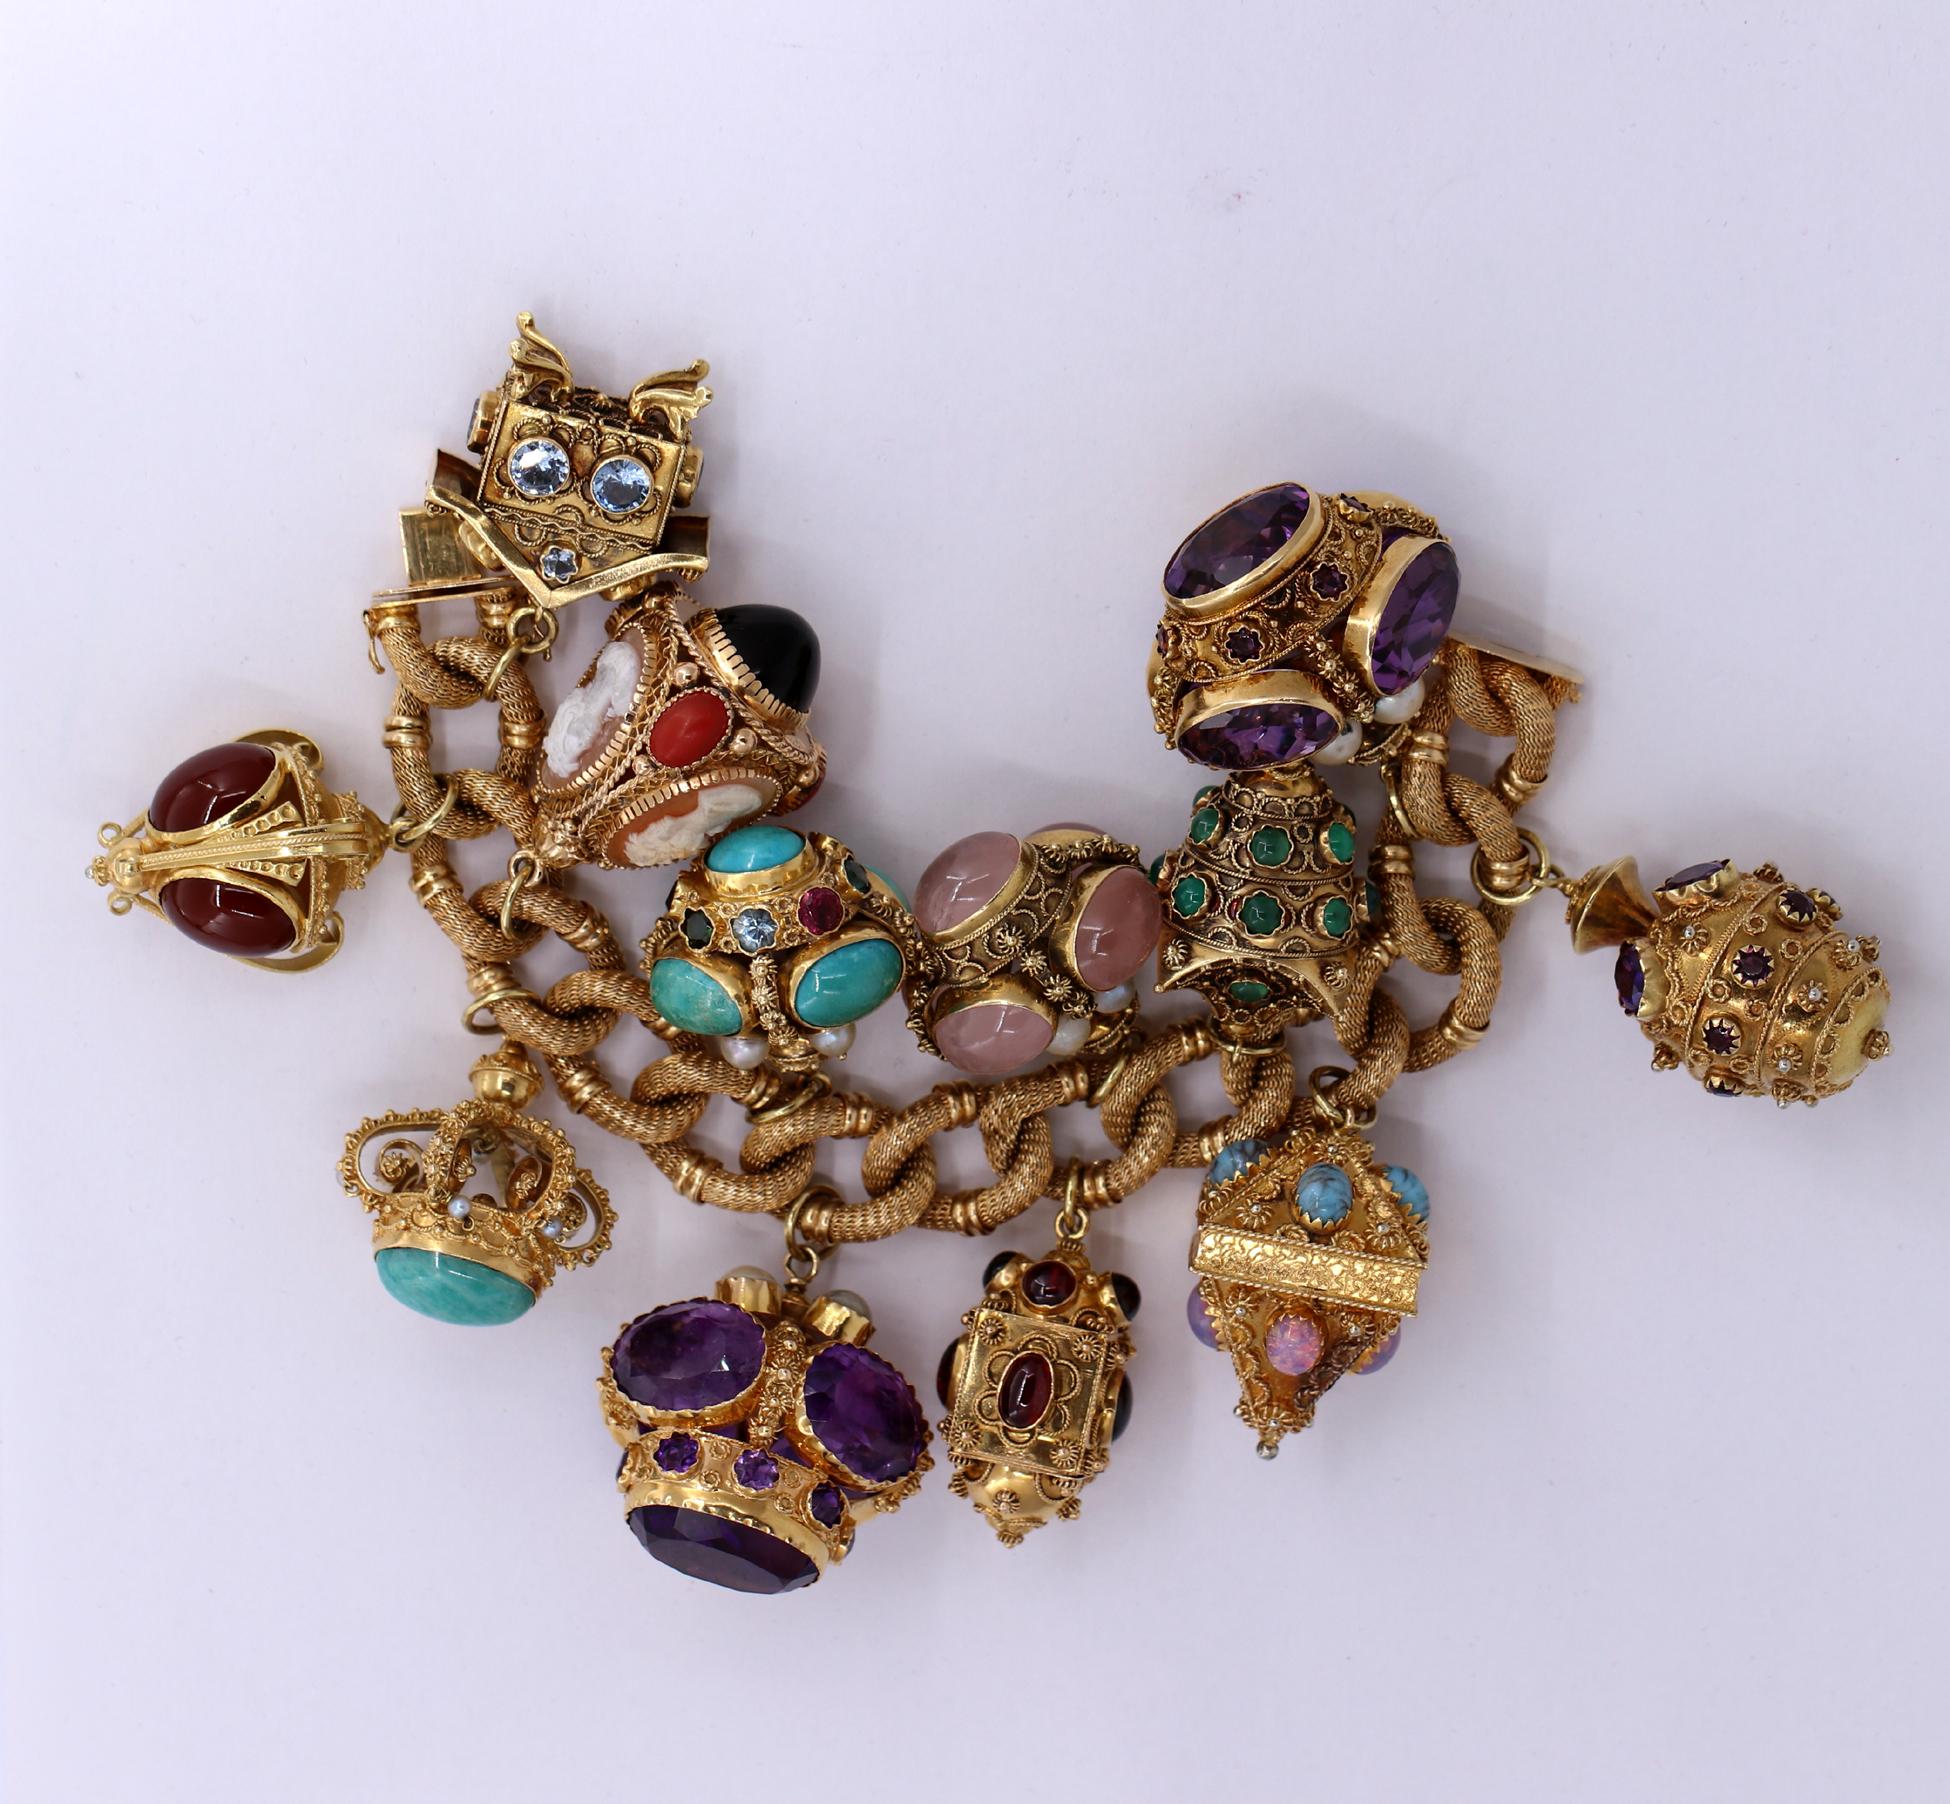 A ladies 18K yellow gold bracelet, with twelves charms, measuring 7 1/4 inches long. Each charm is set with semi-precious gemstones offering a variety of beautiful color. Sometimes referred to as 